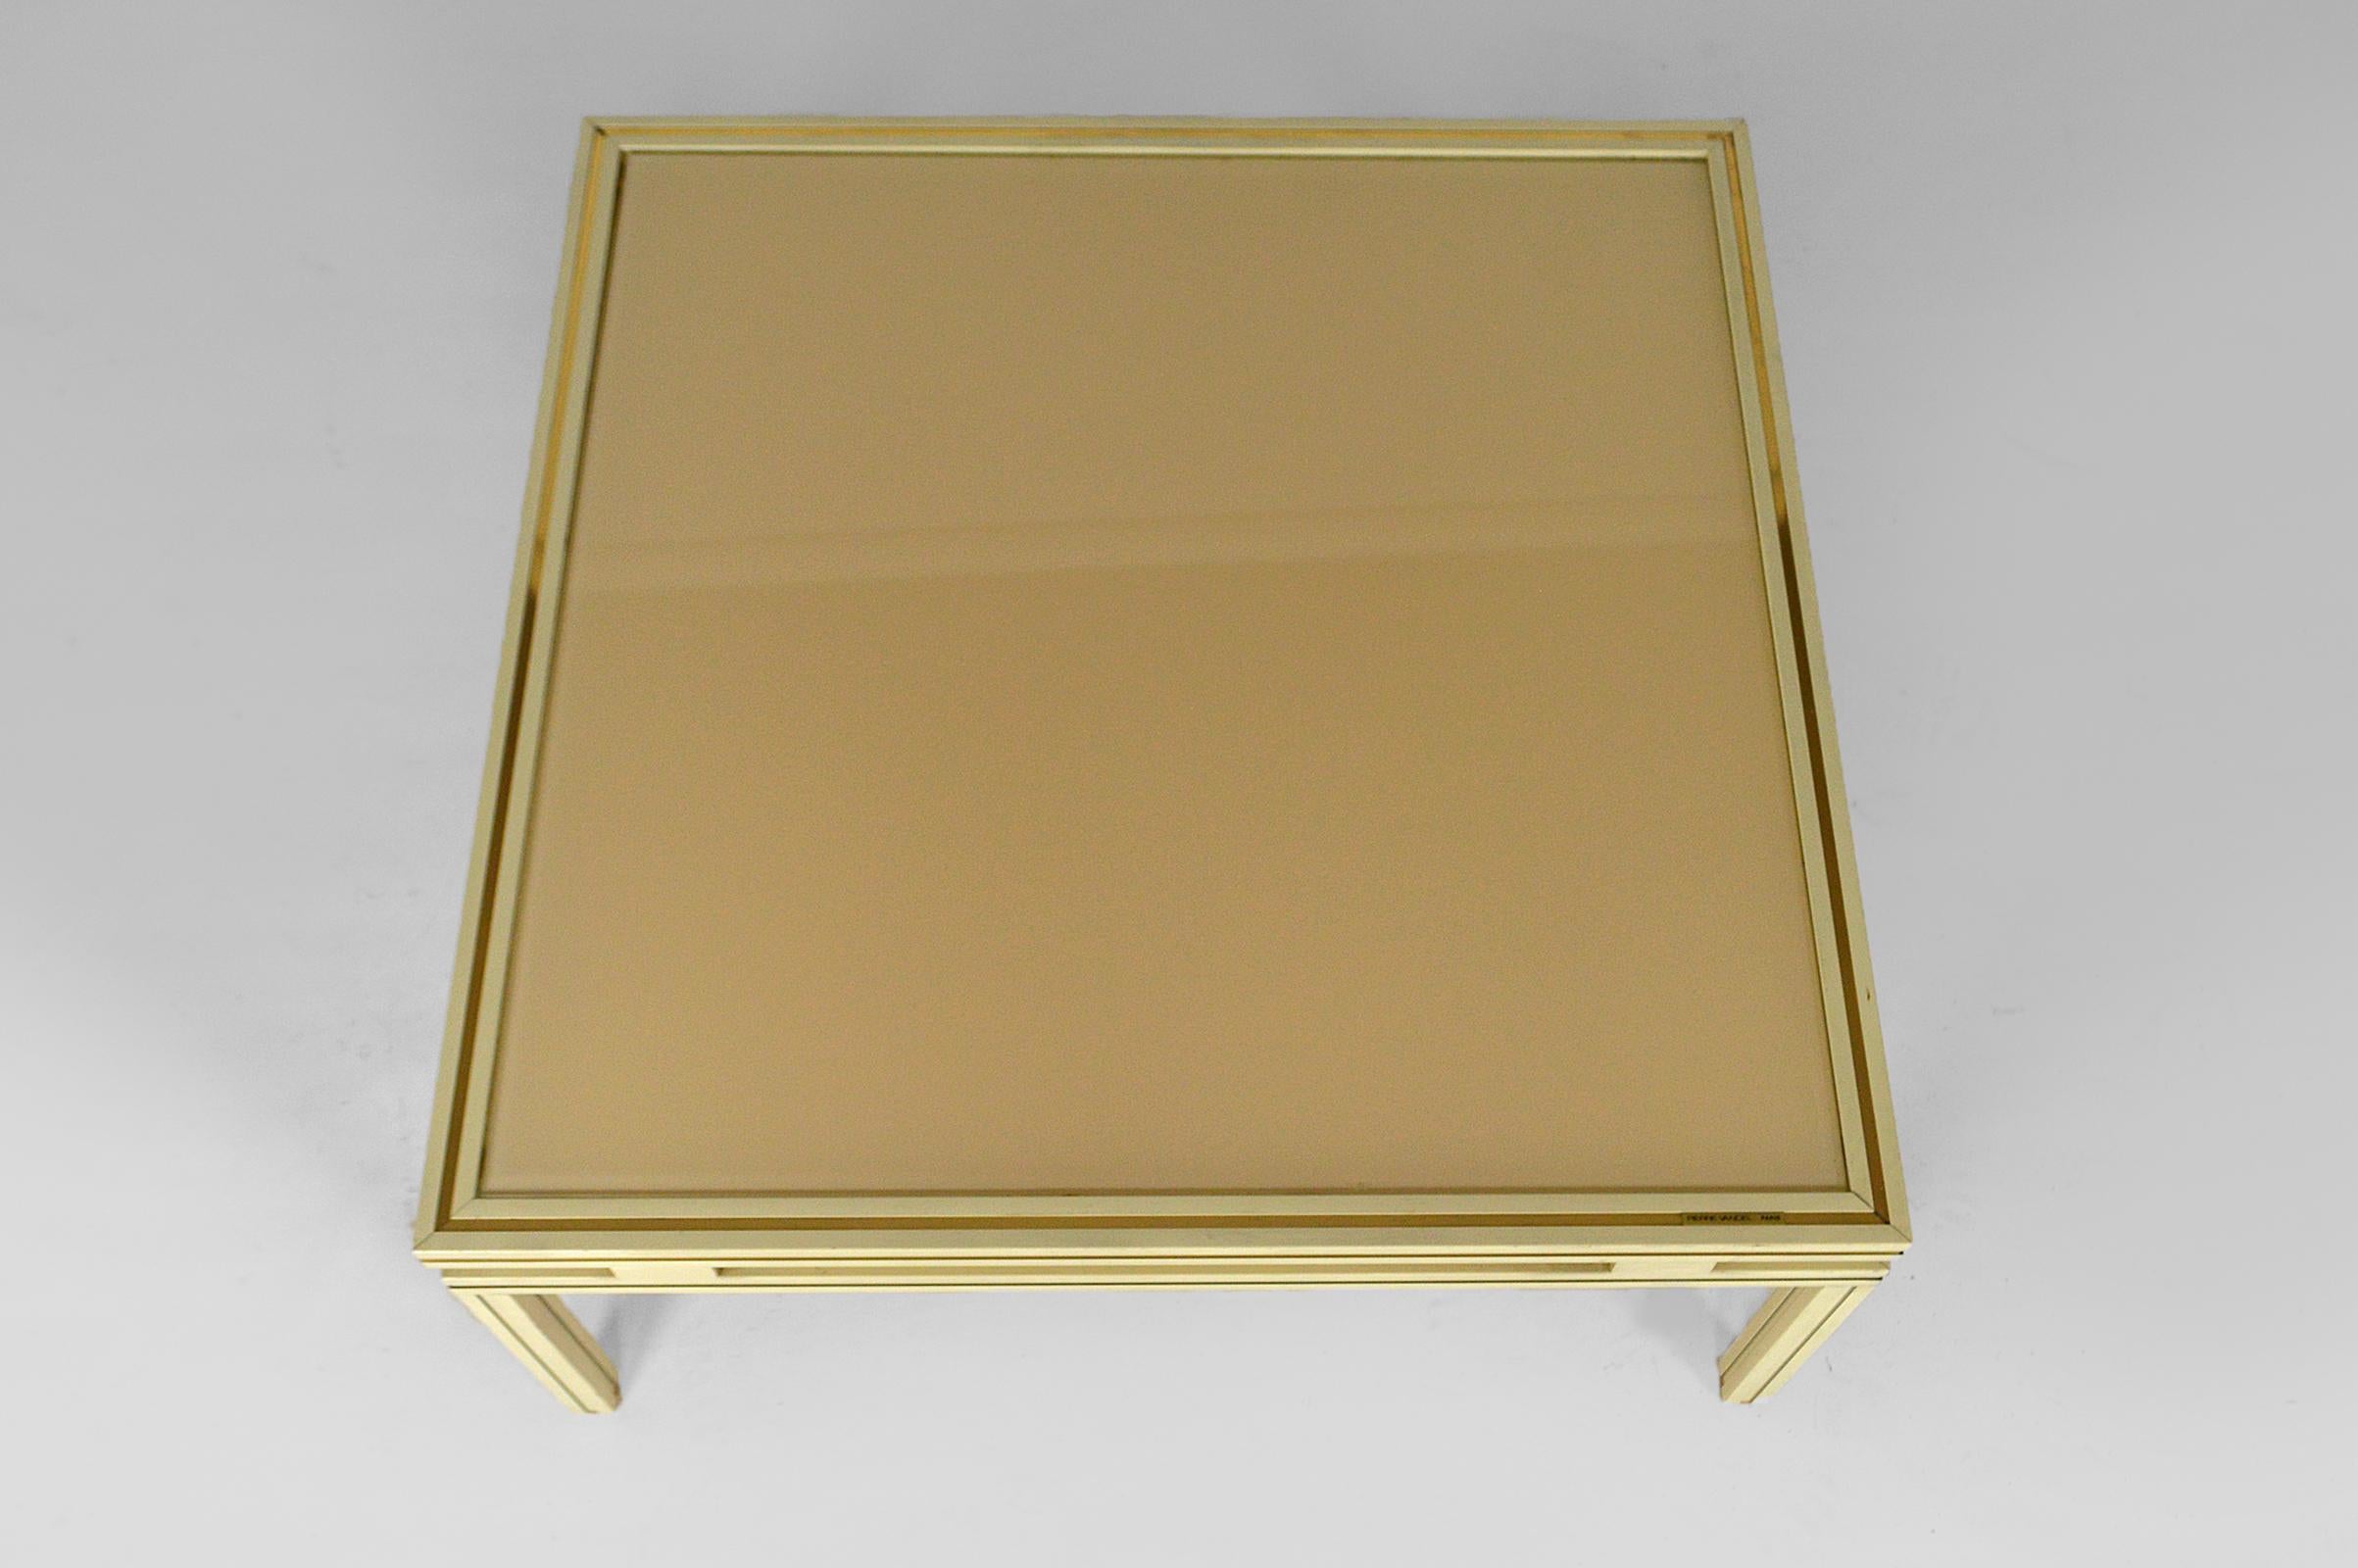 Late 20th Century Square Coffee Table in Lacquered Aluminum by Pierre Vandel, France, 1970s For Sale